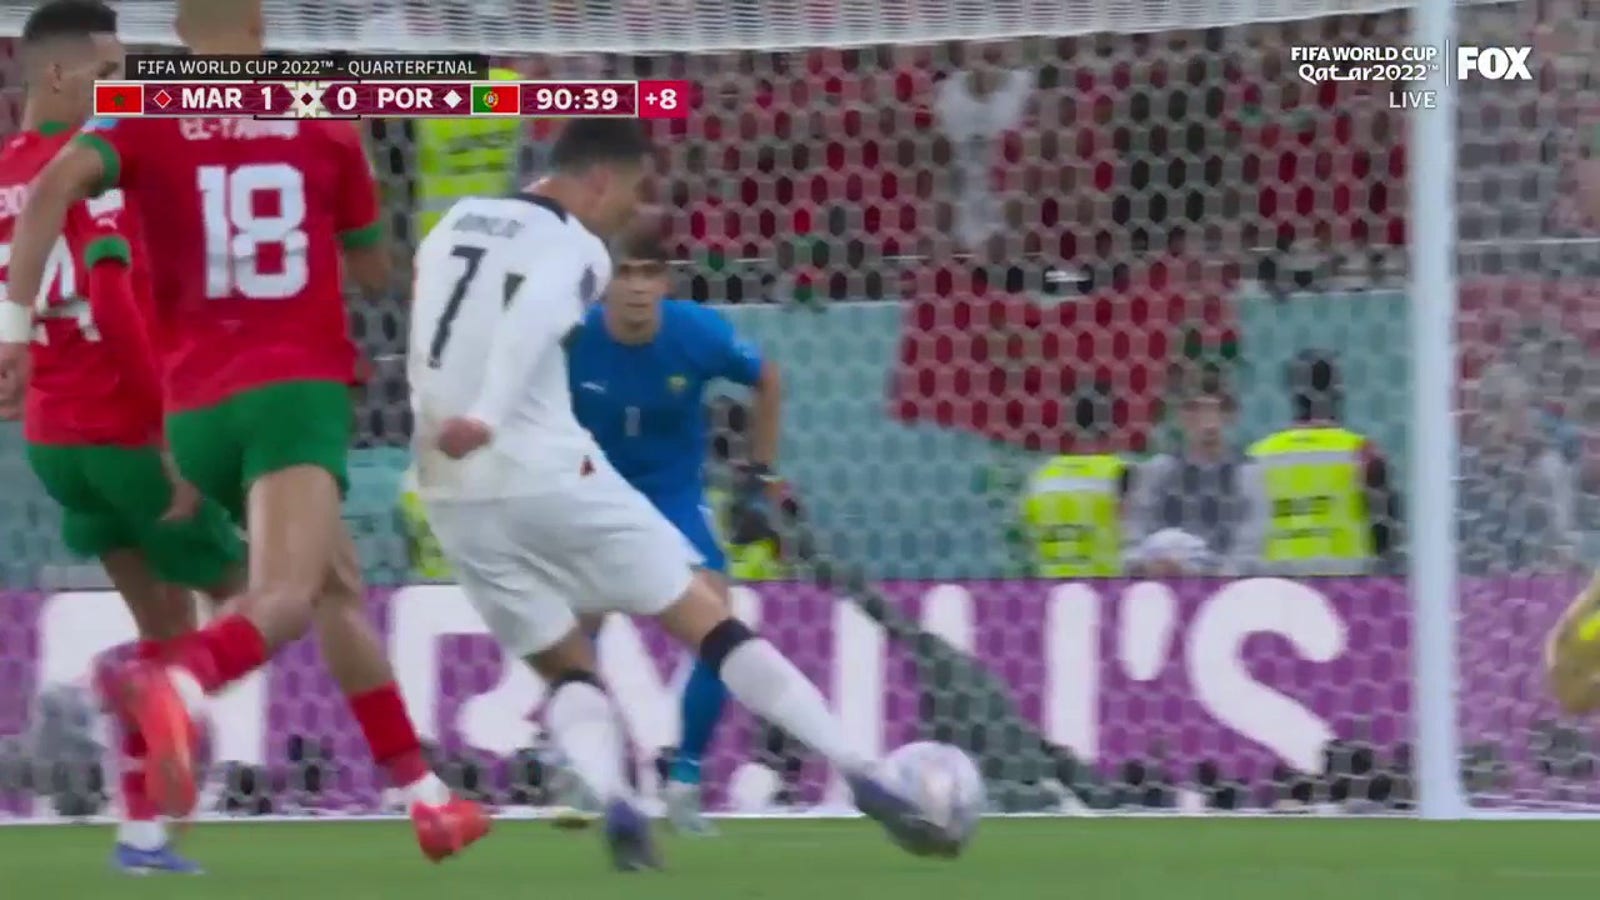 Cristiano Ronaldo came THIS CLOSE to tying it